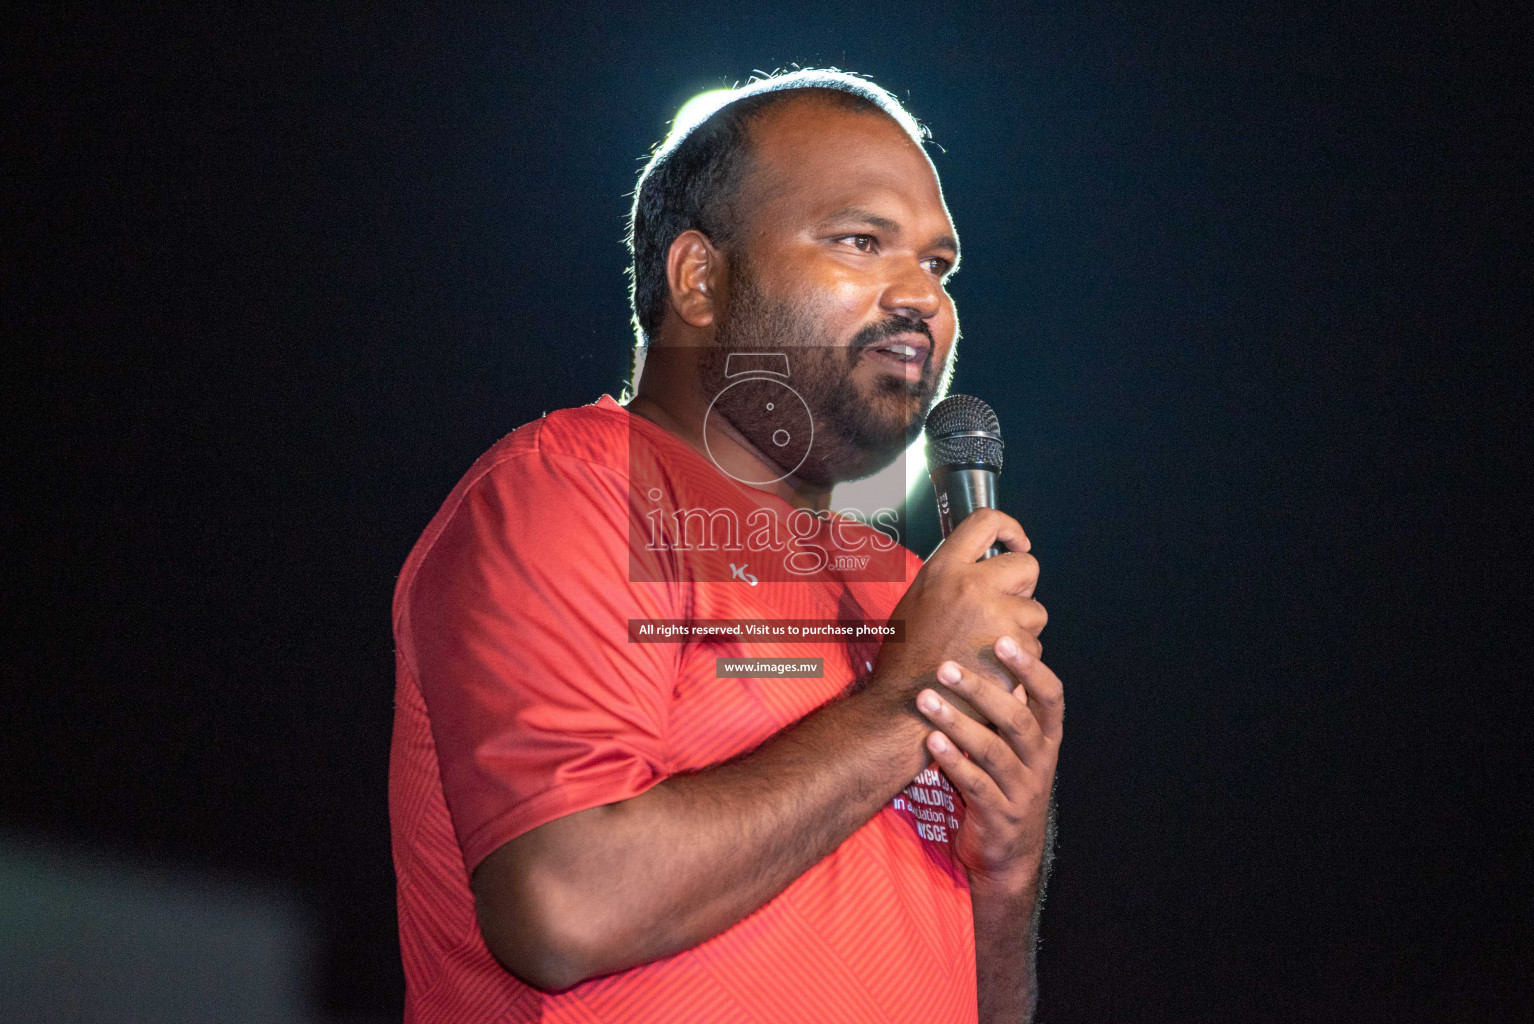 Opening Ceremony of Club Maldives Cup 2019 held in Hulhumale', Maldives on 09th April 2019. Photos: Ismail Thoriq/ images.mv